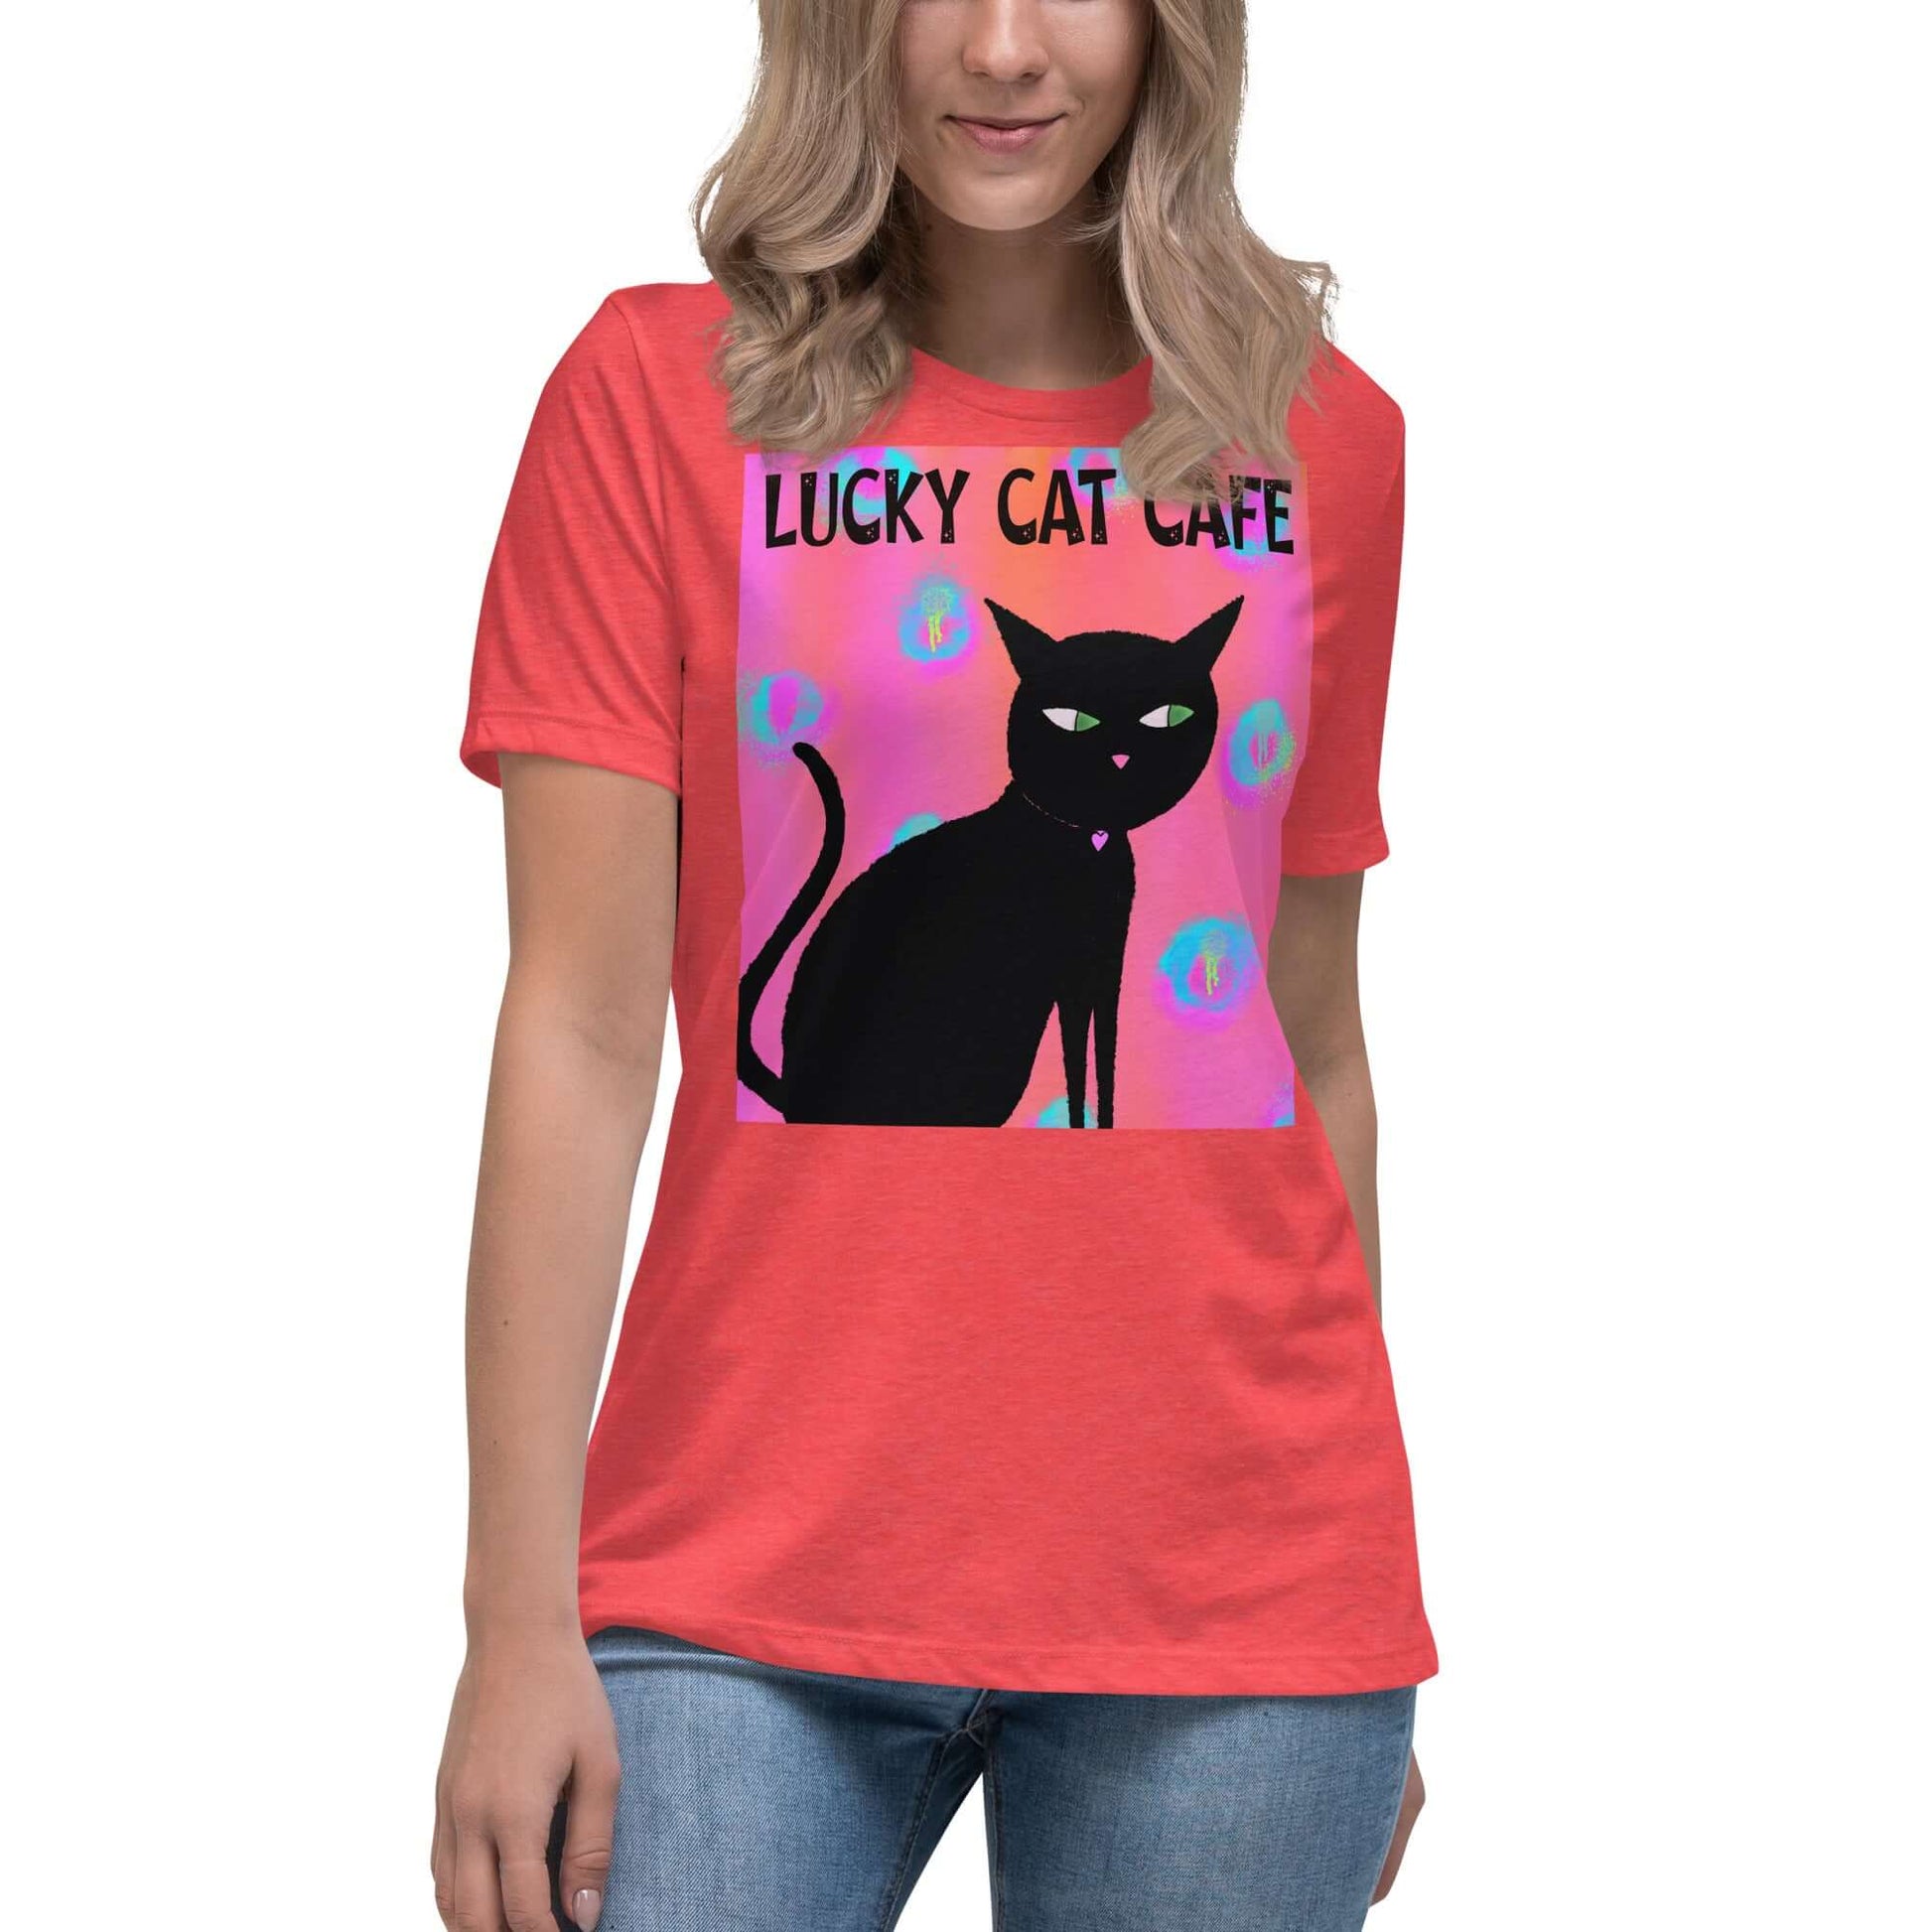 Black Cat on Hot Pink Tie Dye Background with Text “Lucky Cat Cafe” Women’s Short Sleeve Tee in Heather Red